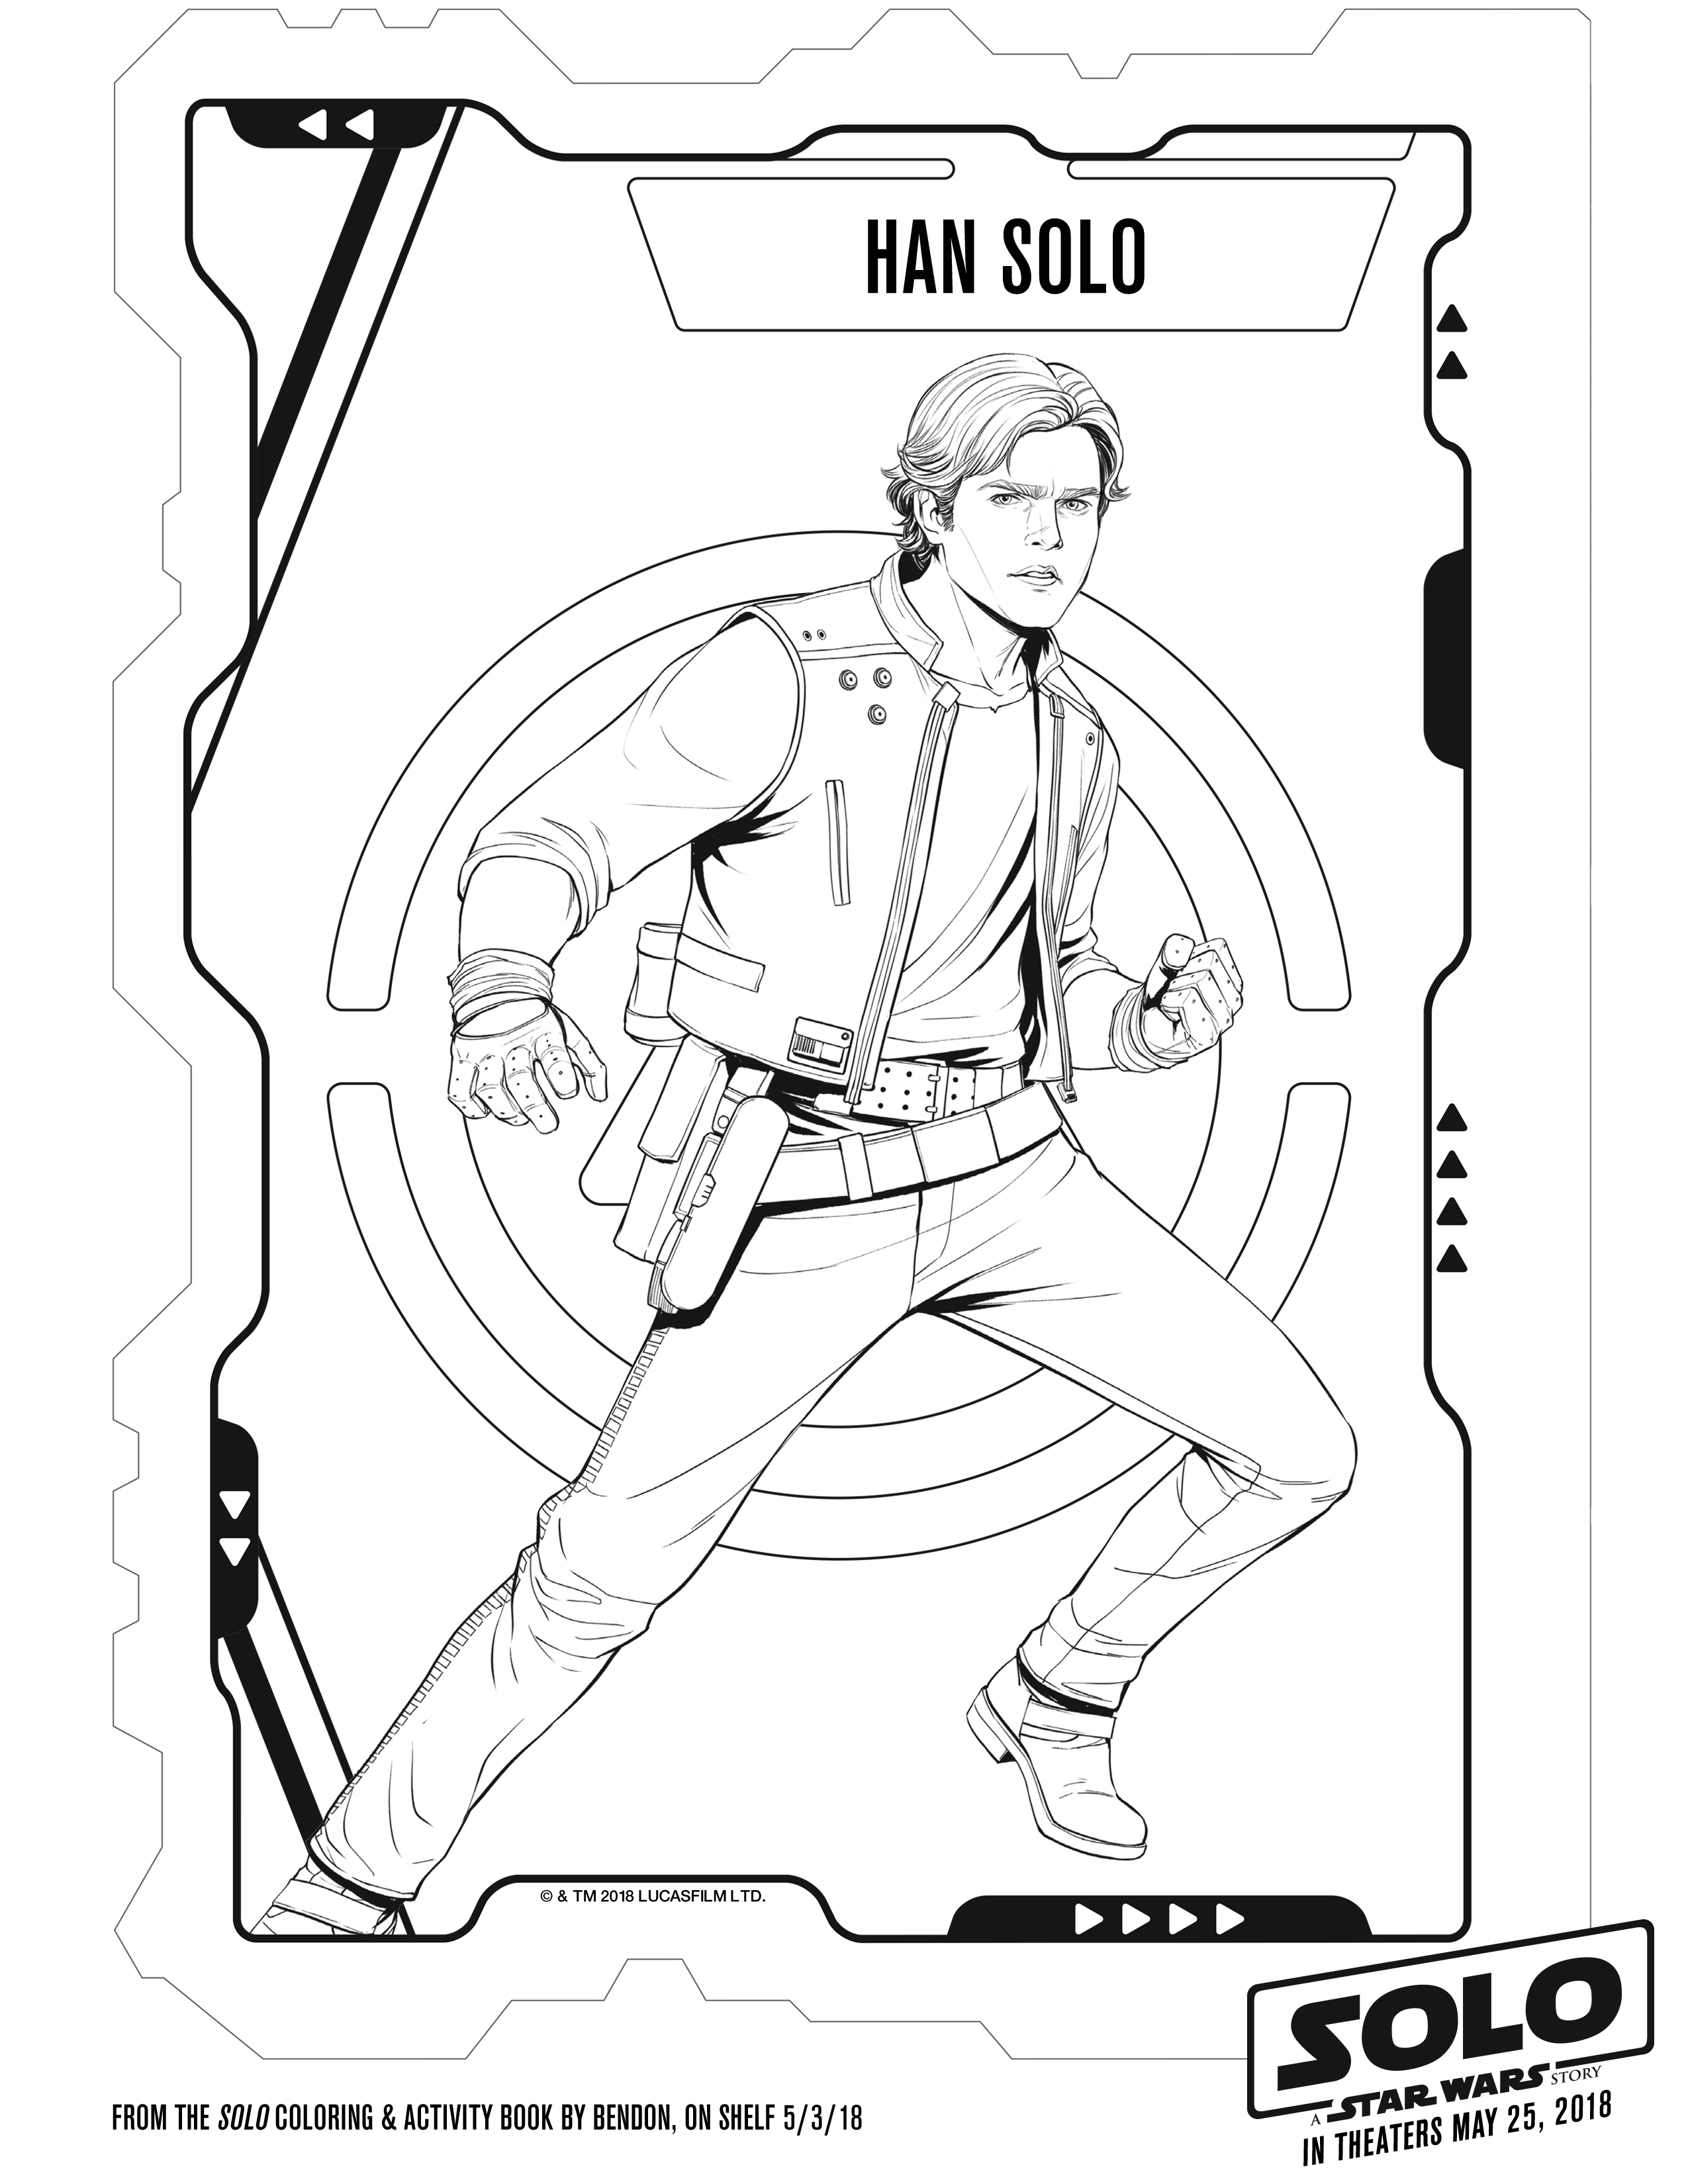 Hans Solo Free Printable Solo: A Star Wars Story Coloring Pages and Activities